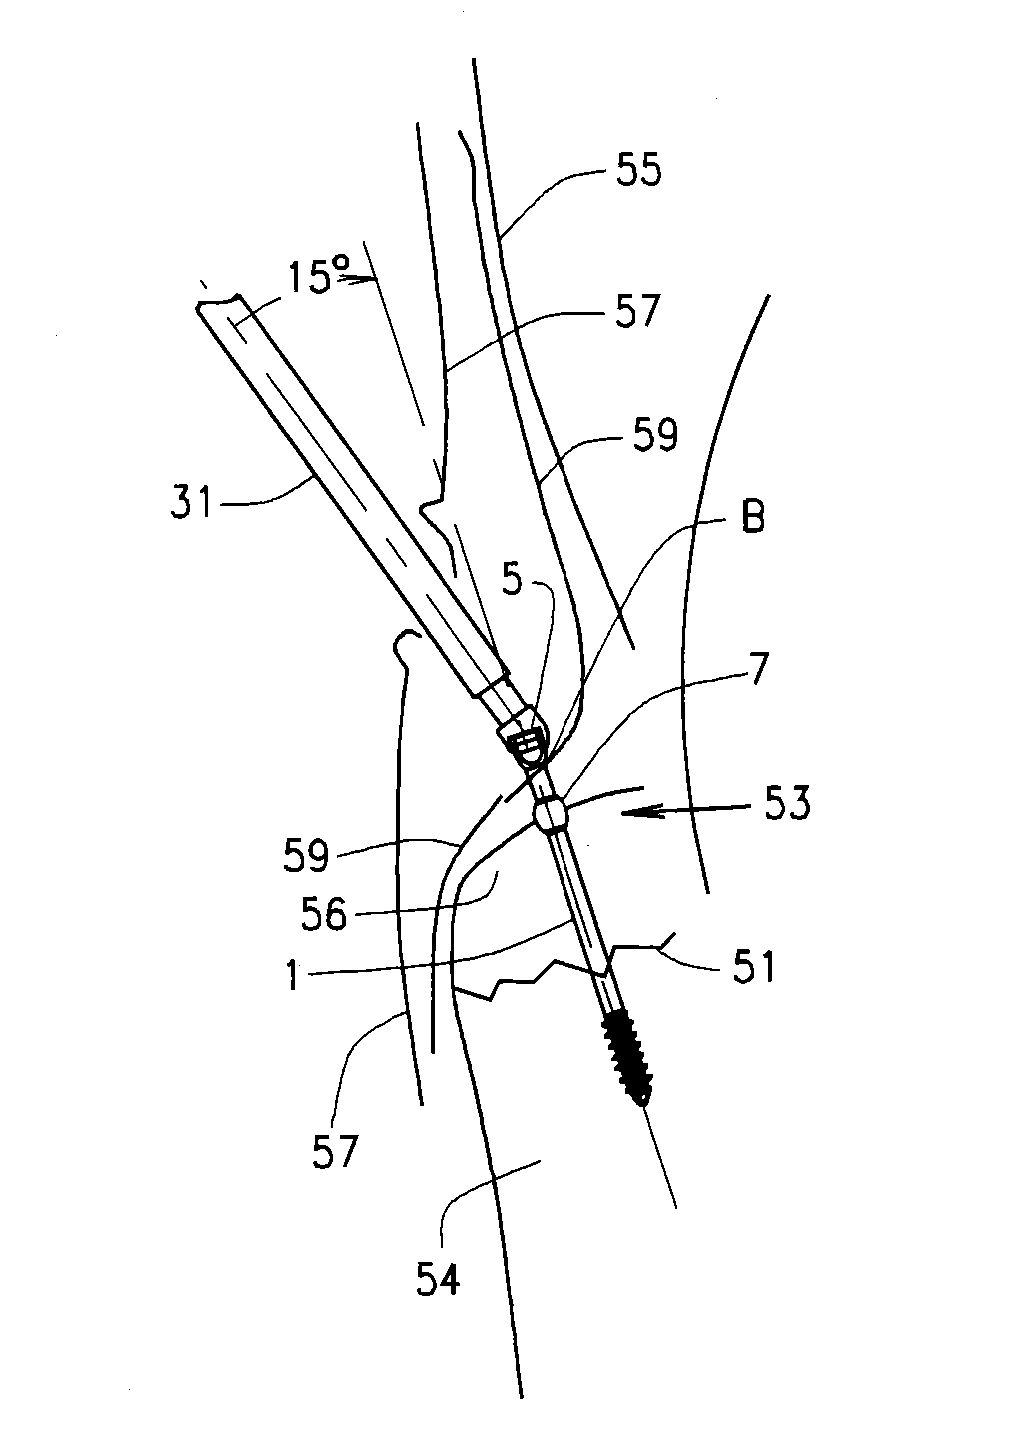 Minimal incision removable bone screw, driver, and method of use